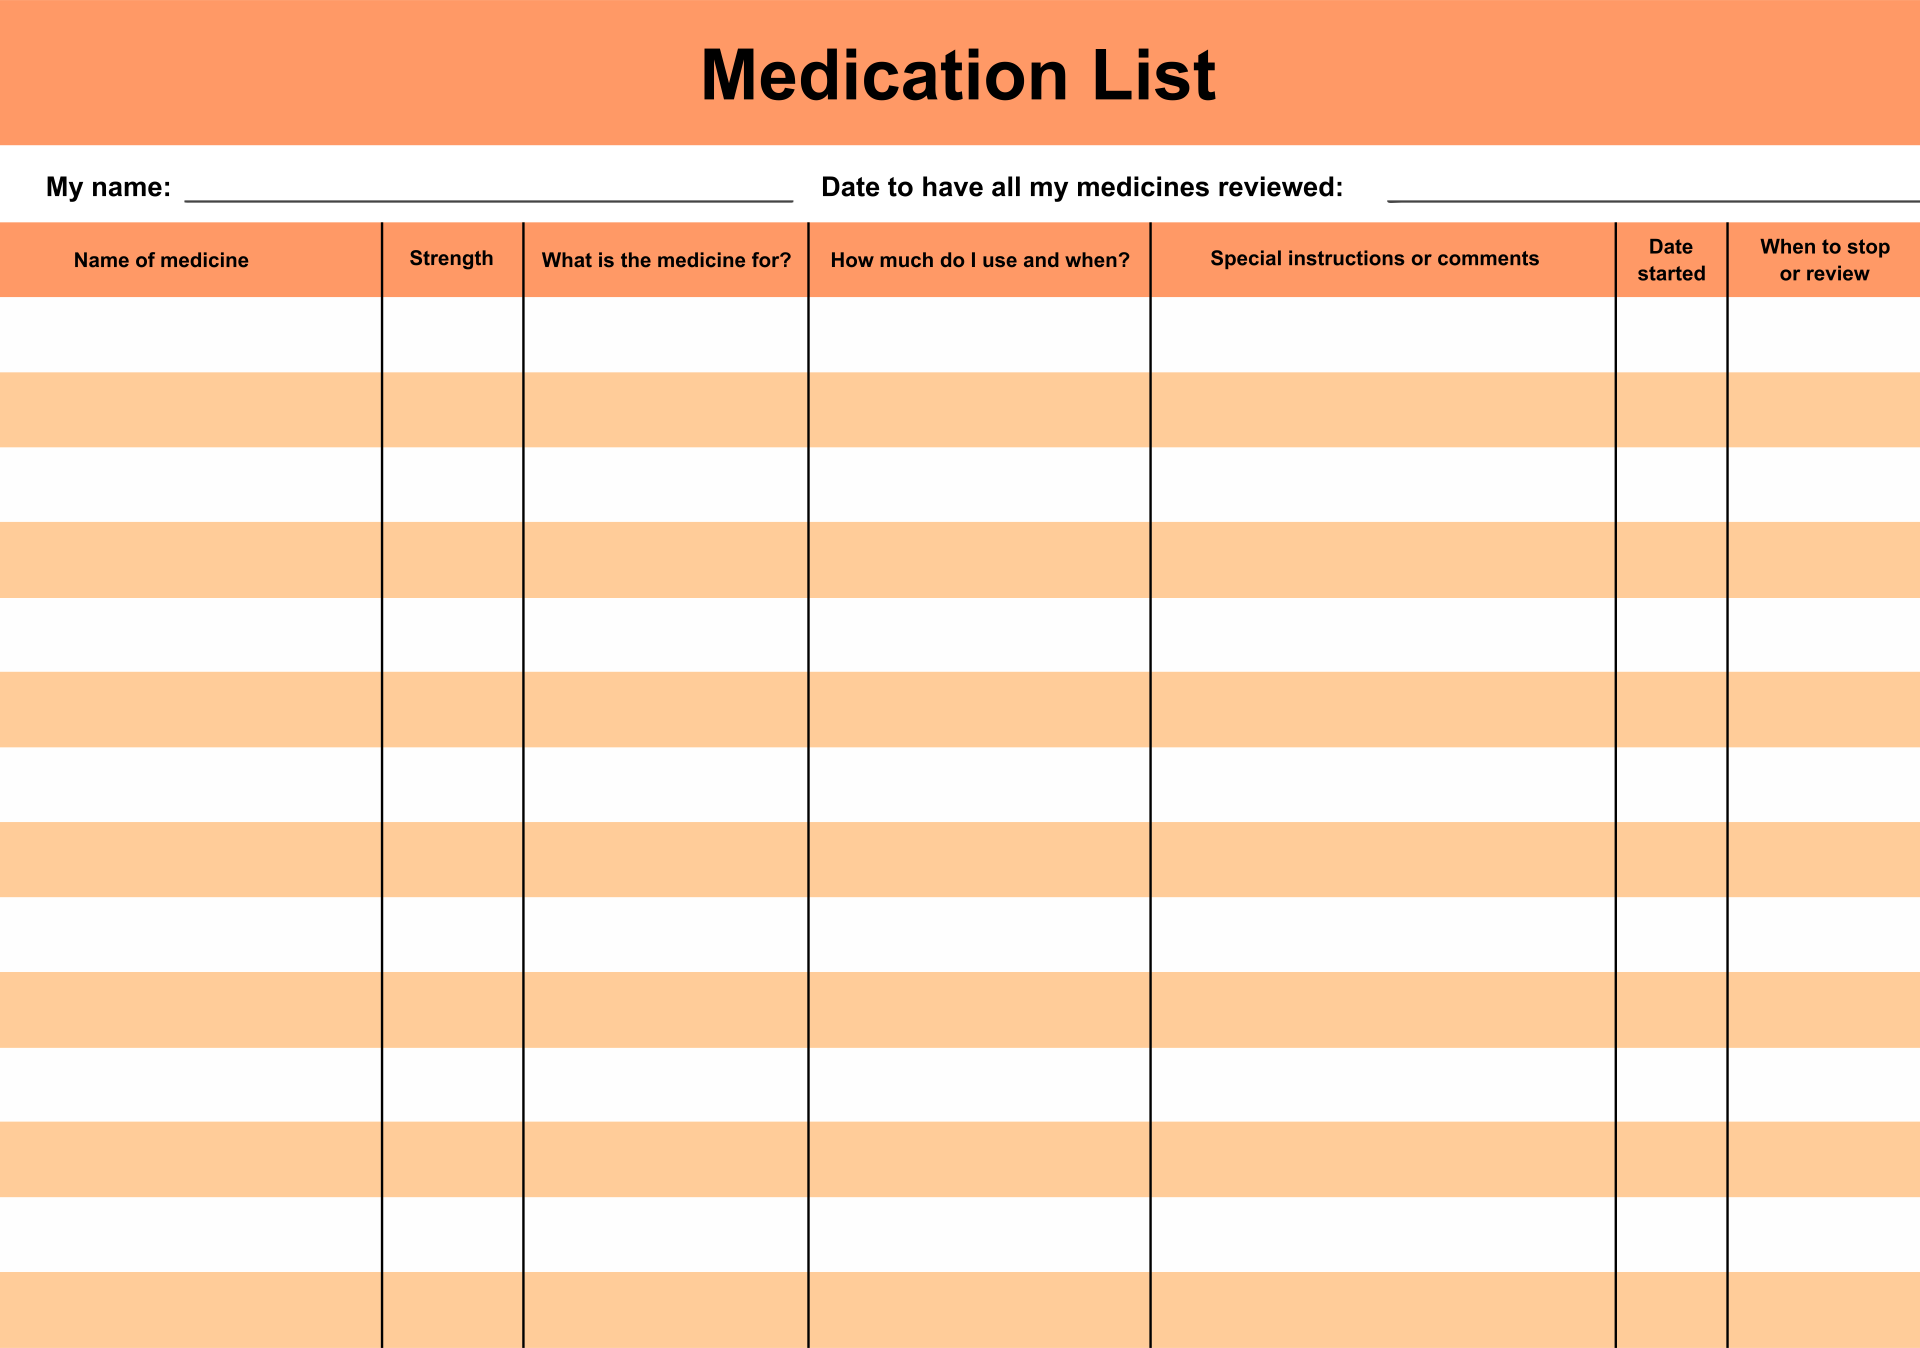 download-blank-medication-administration-record-template-gantt-chart-excel-template